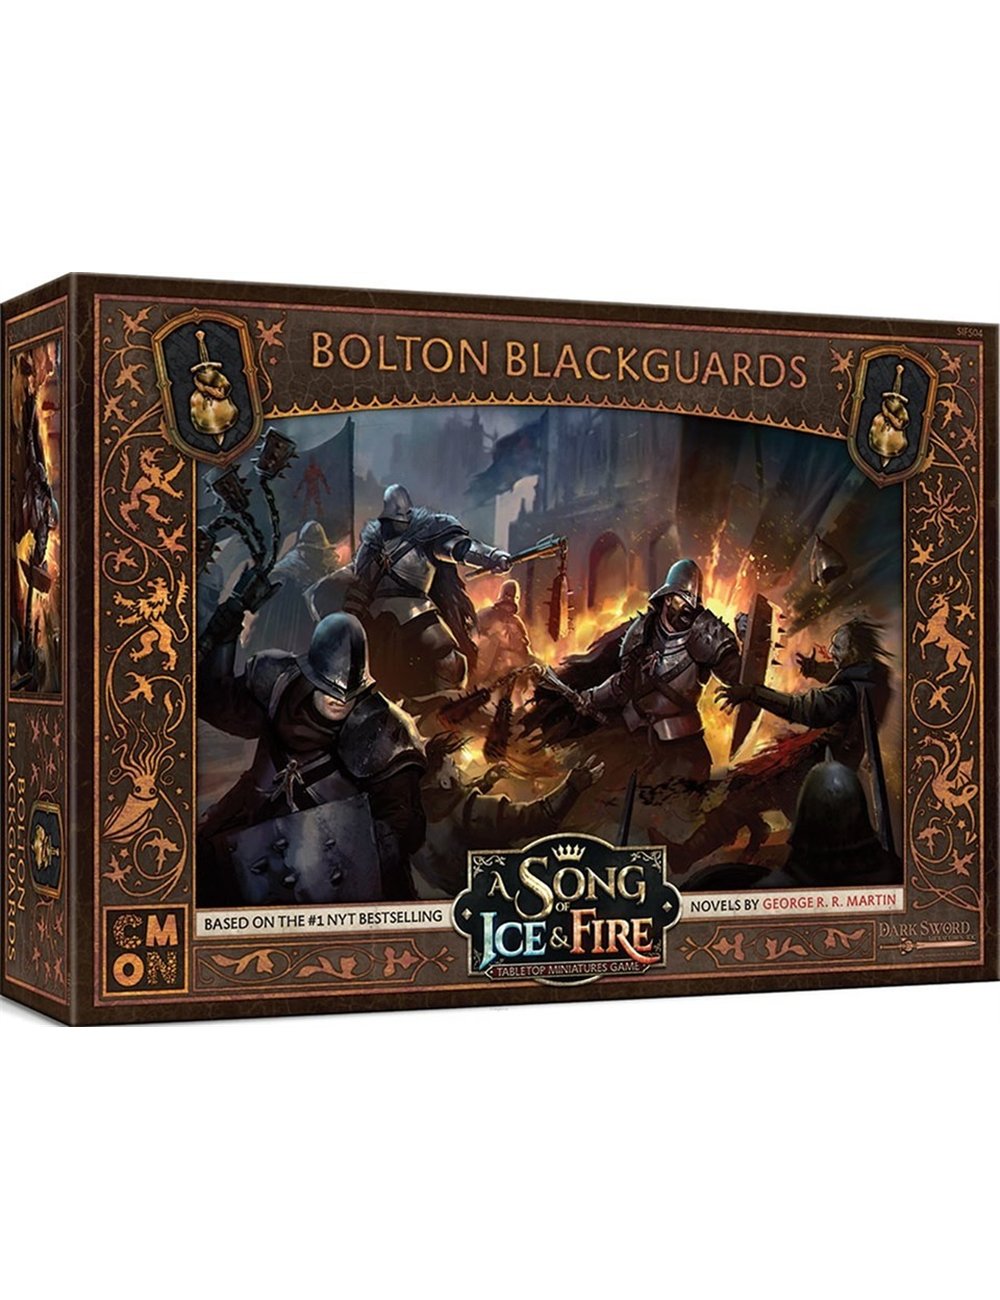 A SONG OF ICE & FIRE - Neutral Bolton Blackguards (ENG)